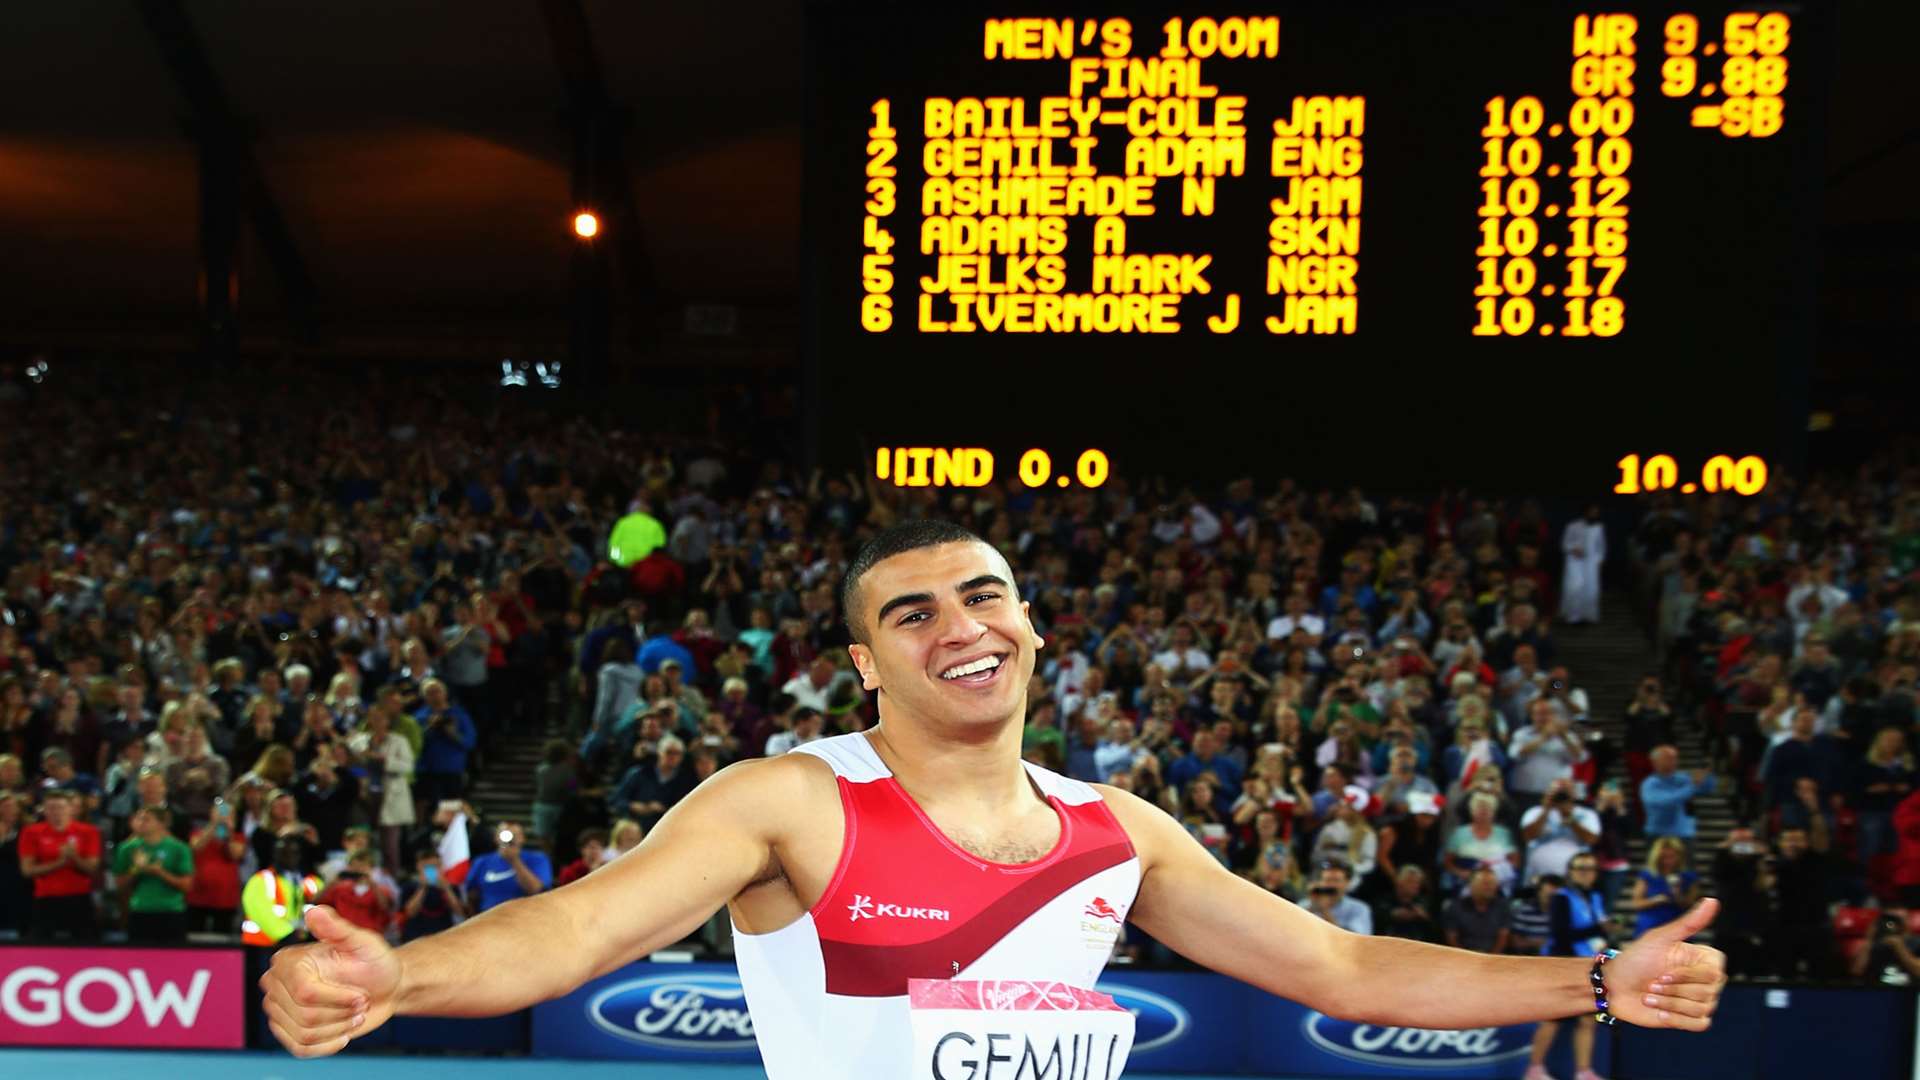 Gemili celebrates his silver medal Picture: Ian Walton/Getty Images